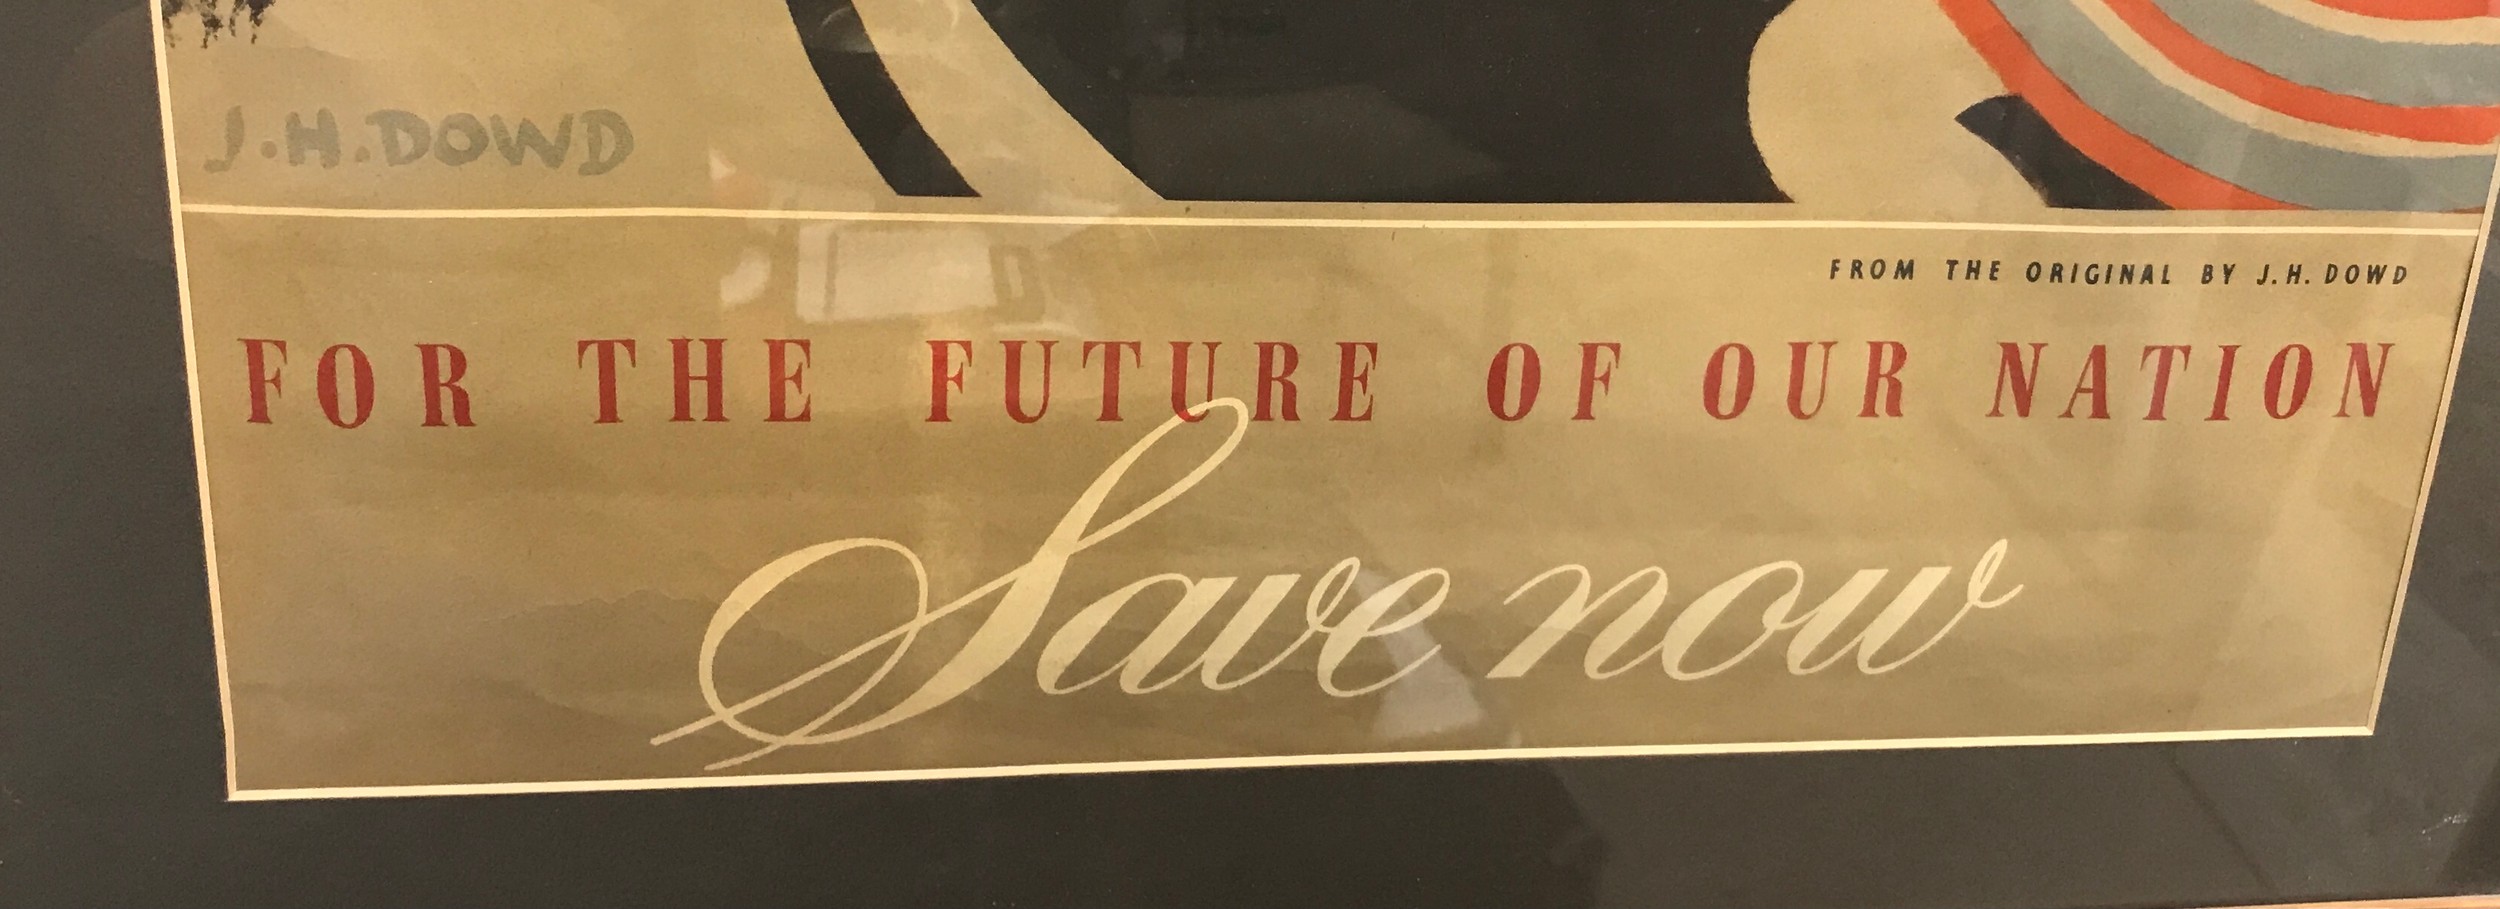 'For The Future of Our Nation Save Now', from the original National Savings Committee poster by J.H. - Image 2 of 3